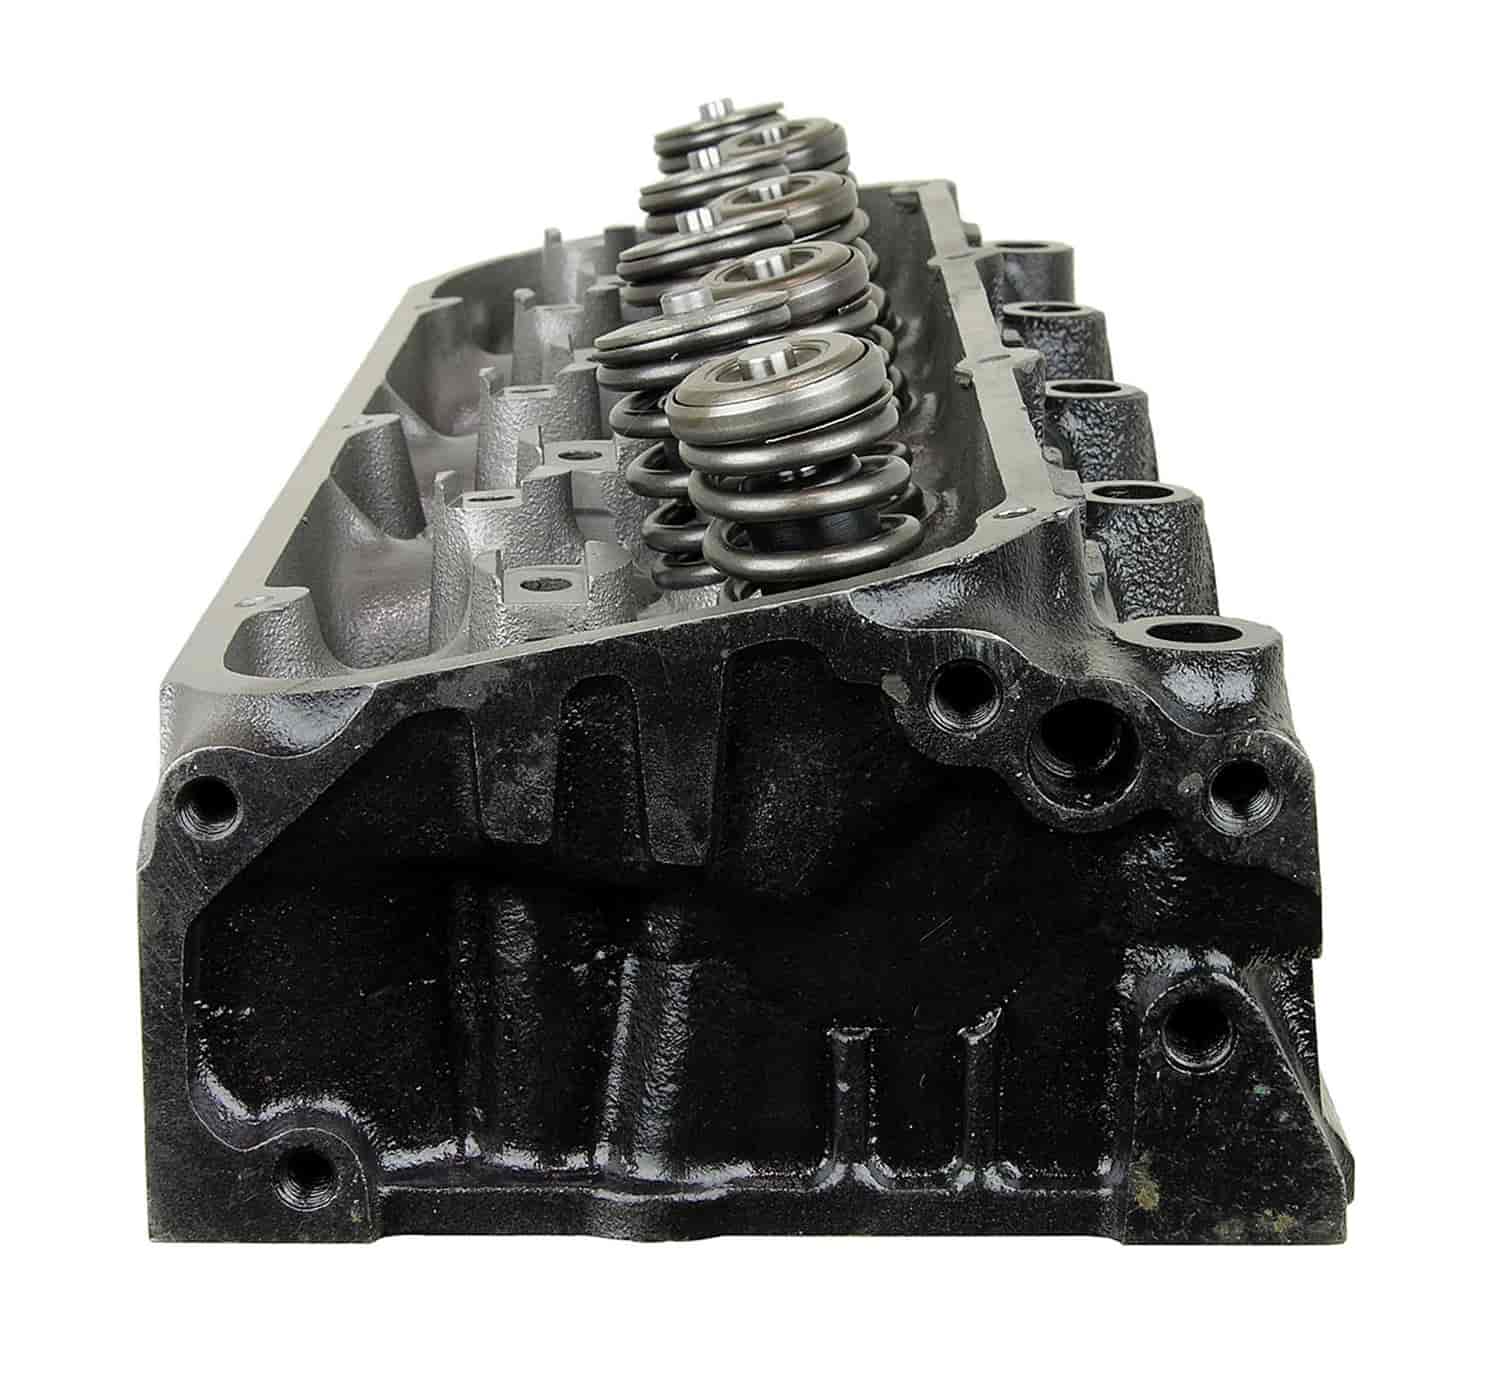 Remanufactured Cylinder Head for 1980-1989 Ford Medium Duty Truck with 429ci/7.0L V8